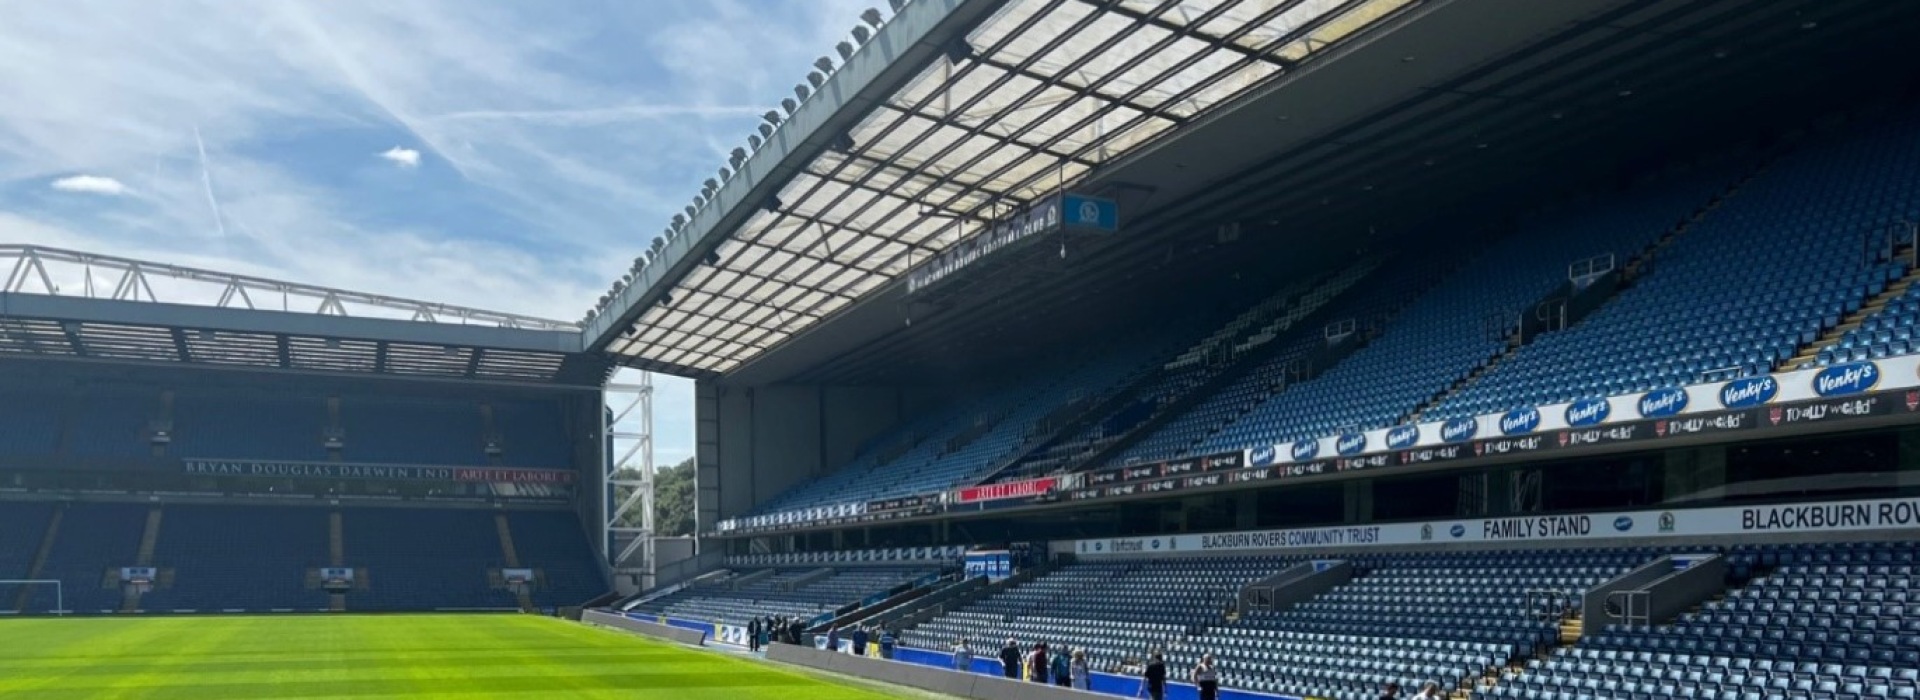 Taziker Provide Industrial Services to Ewood Park